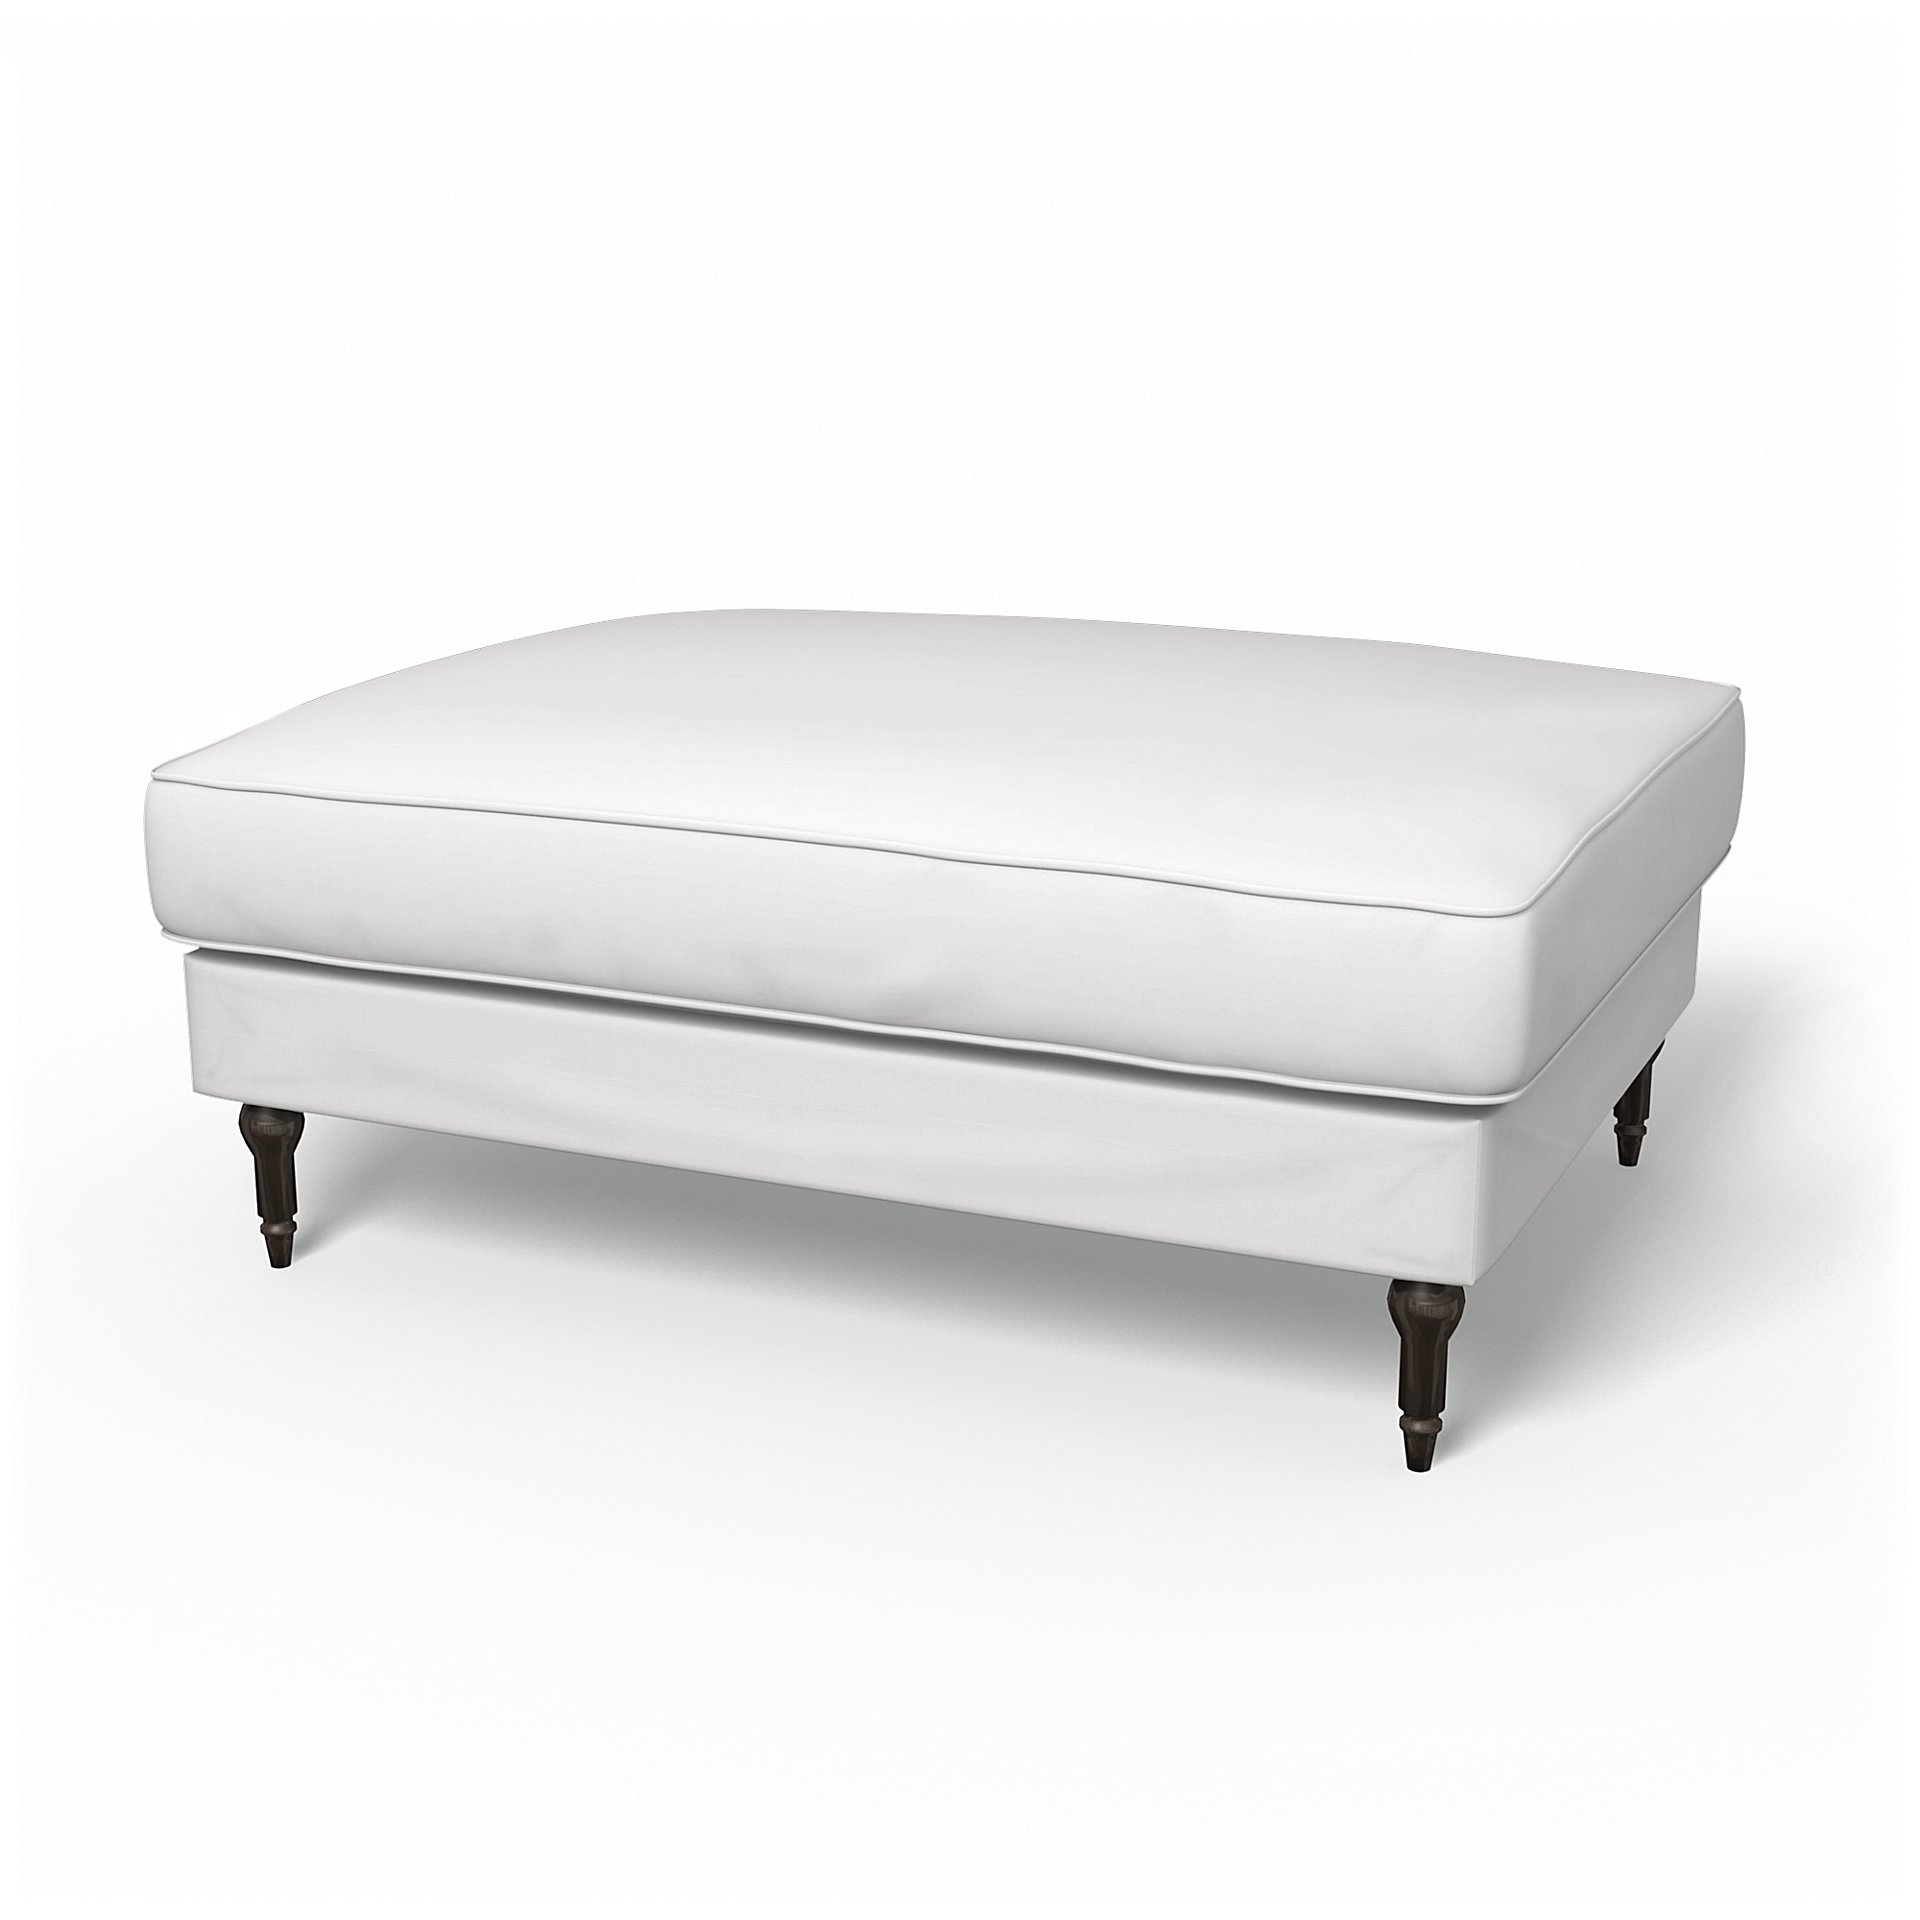 IKEA - Stocksund Footstool Cover, Absolute White, Cotton - Bemz